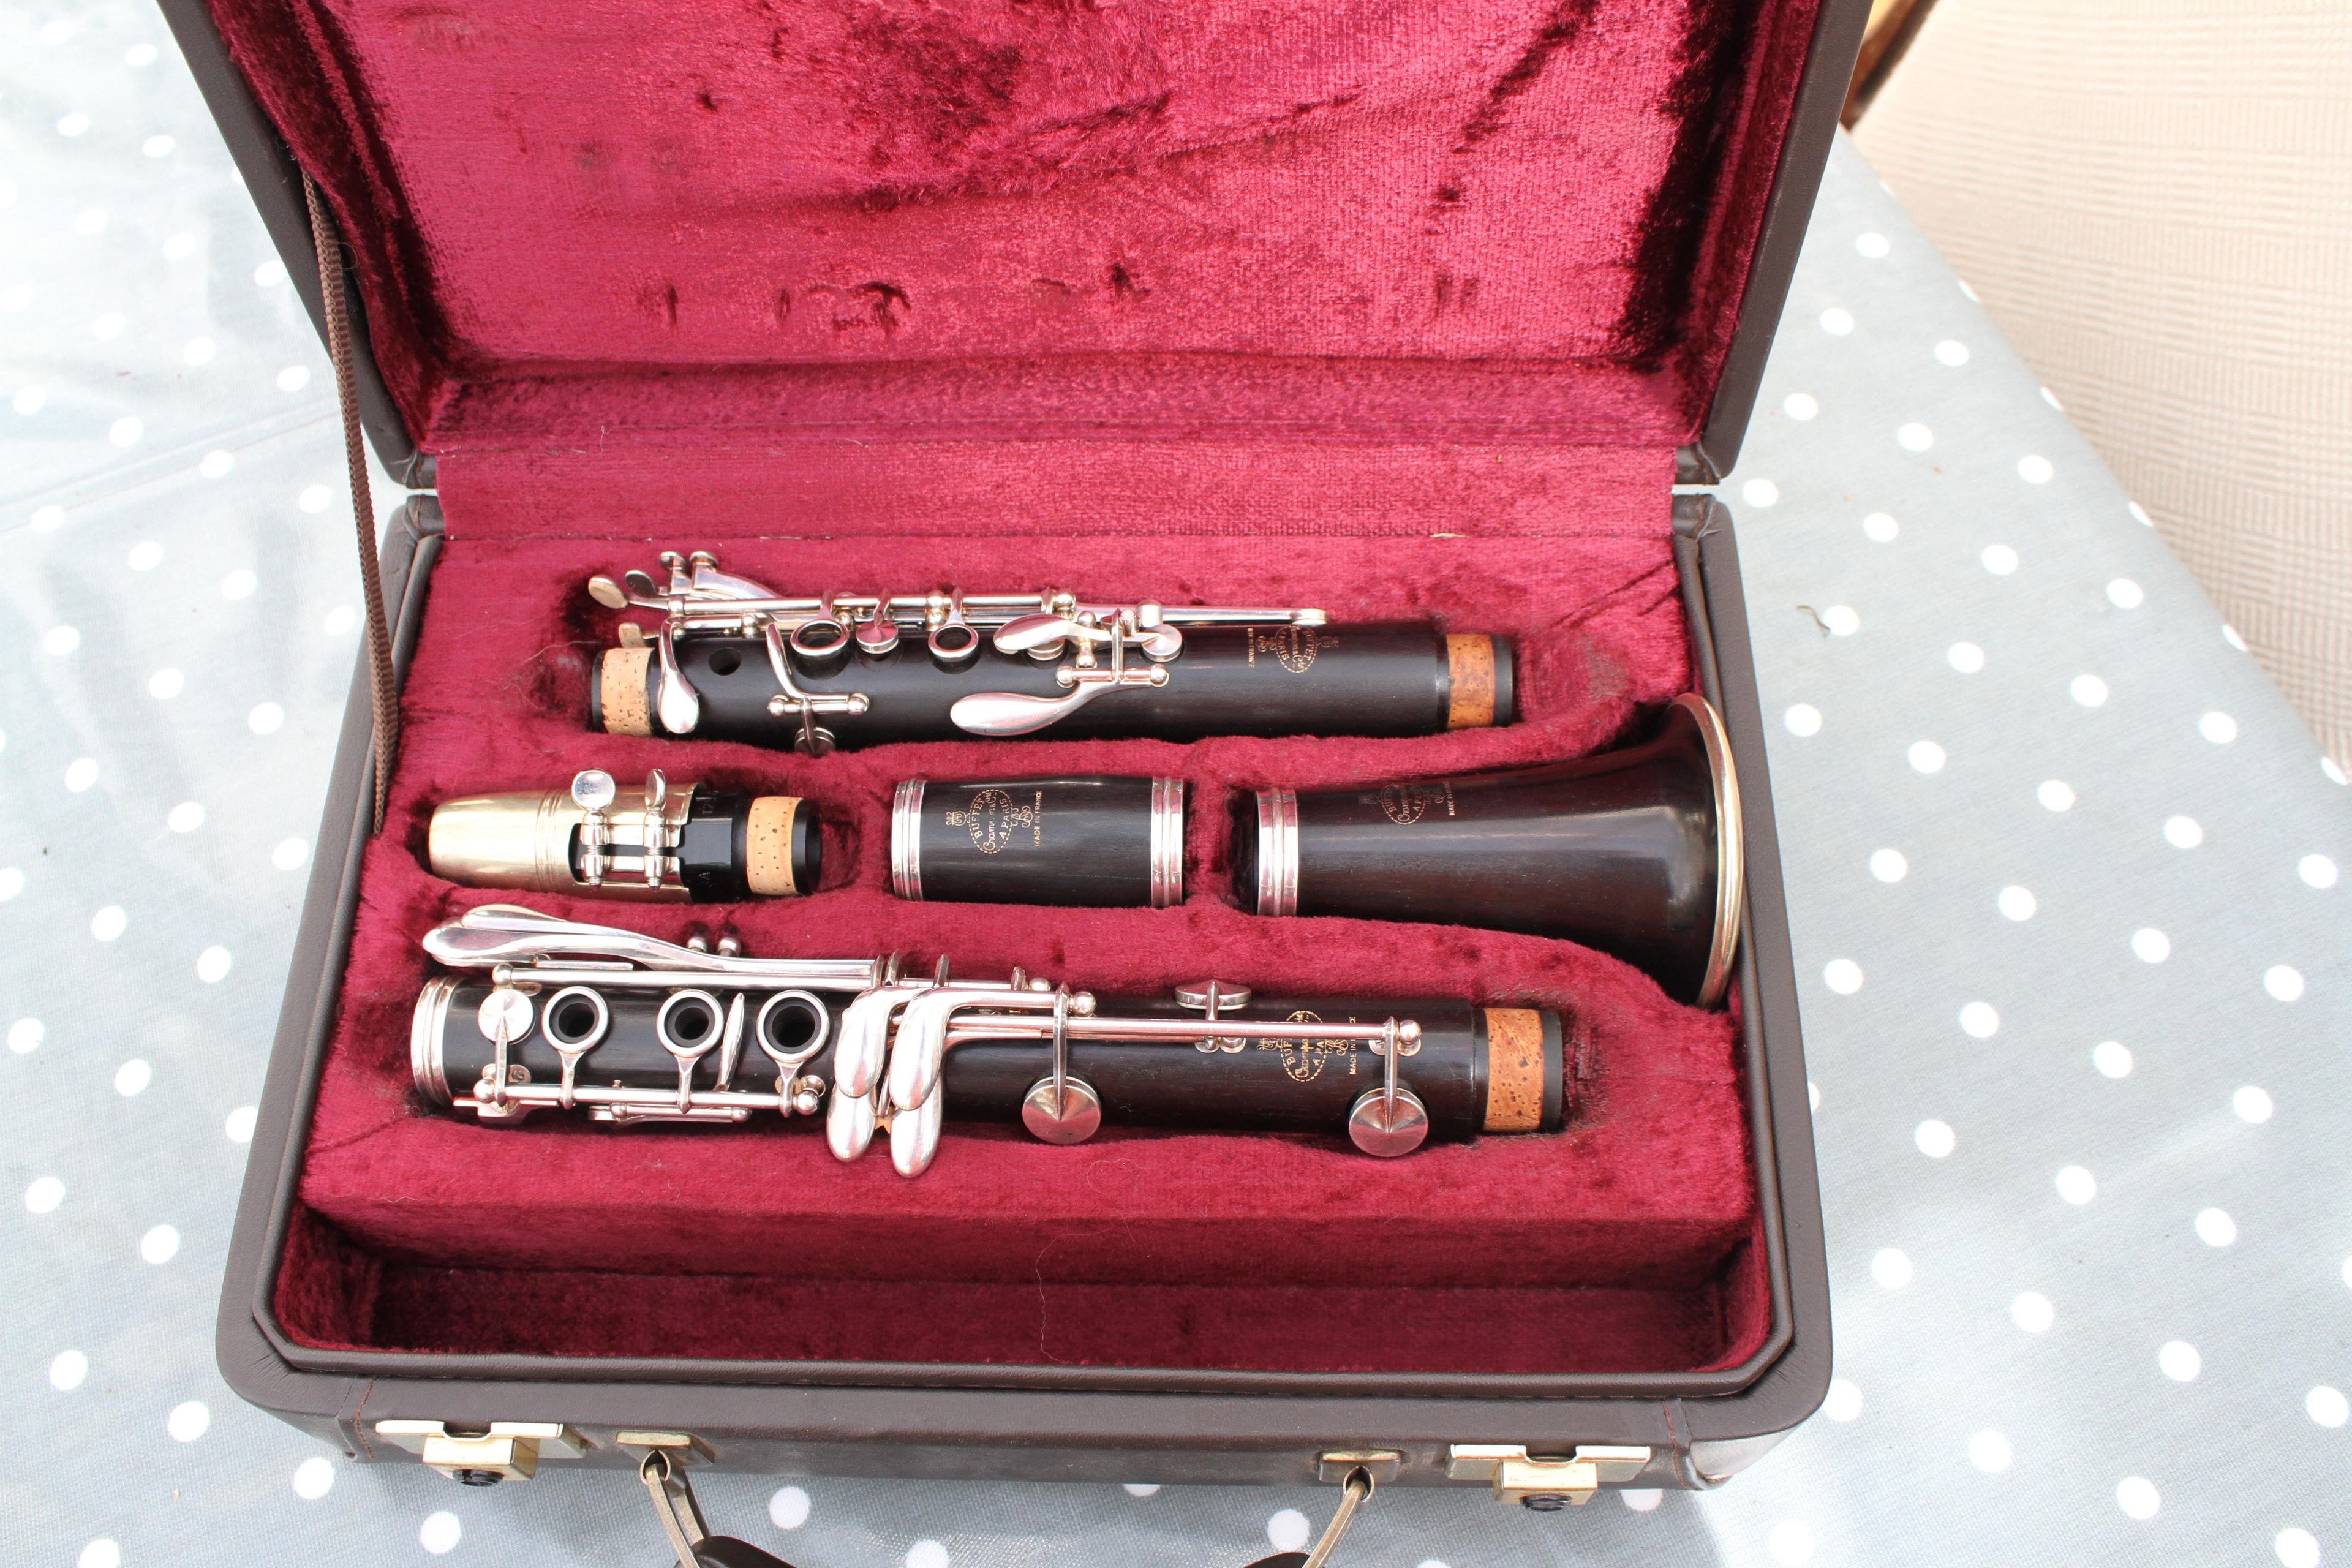 noblet clarinet serial numbers search